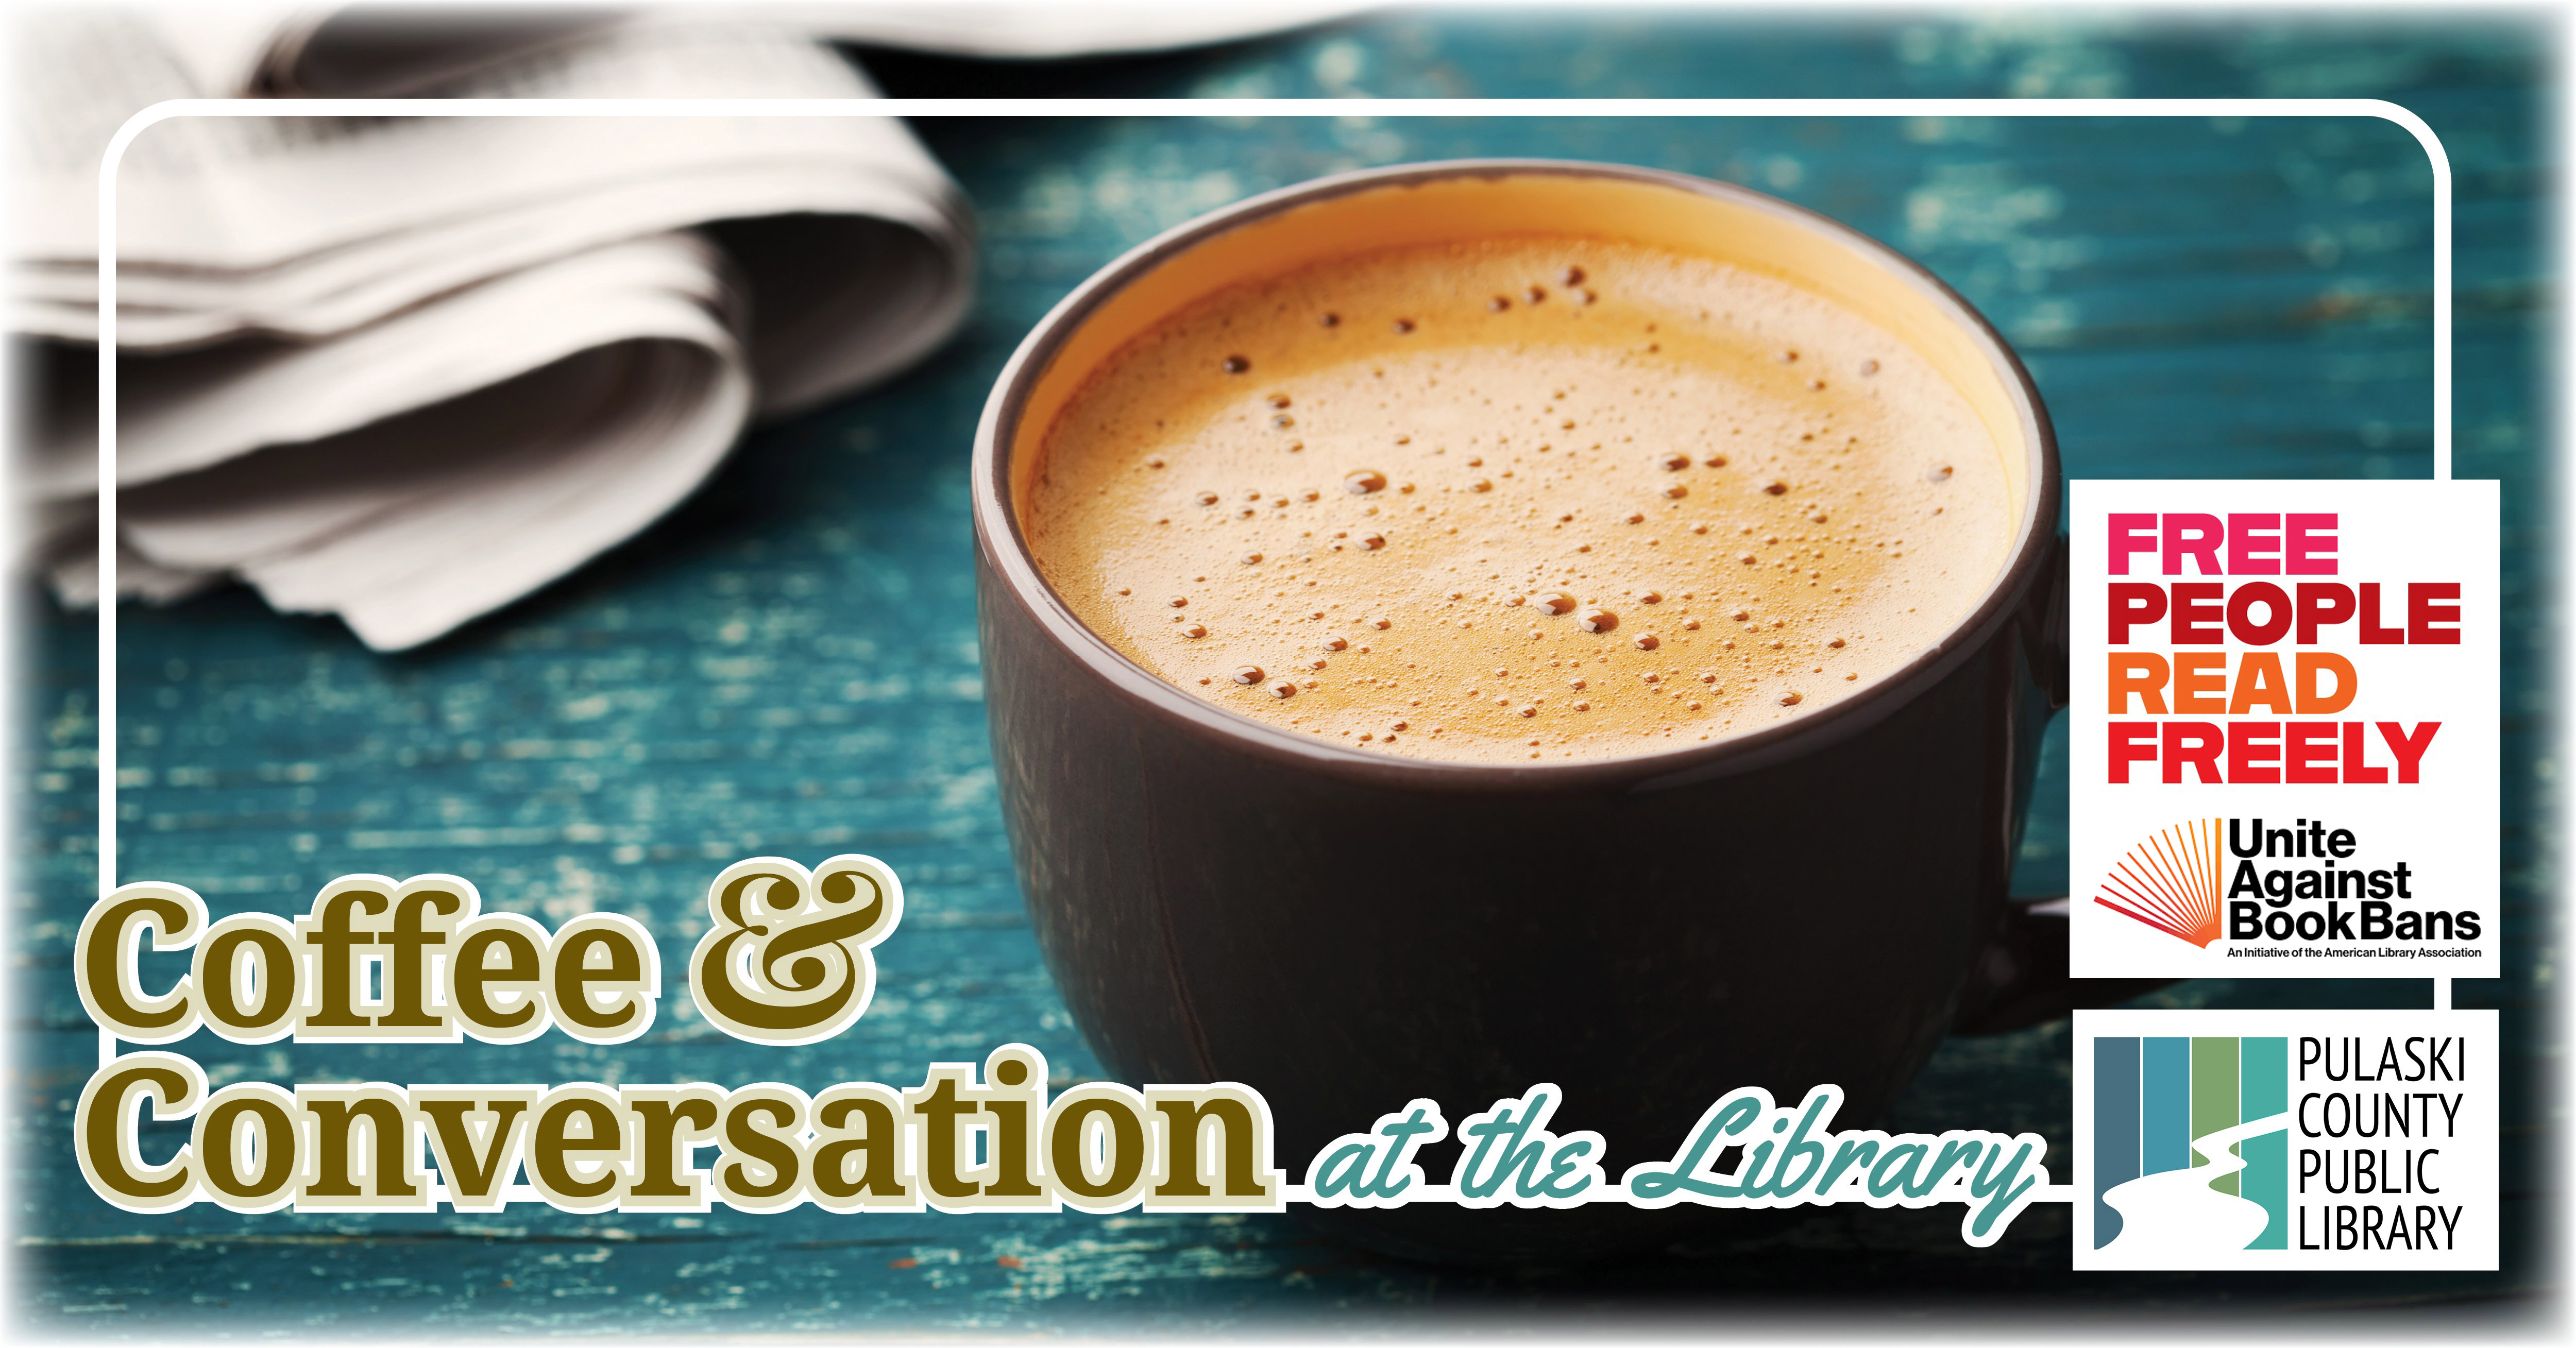 A mug of coffee and the text "Coffee & Conversation at the Library" with logos for "Free People Read Freely" and "Unite Against Book Bans"